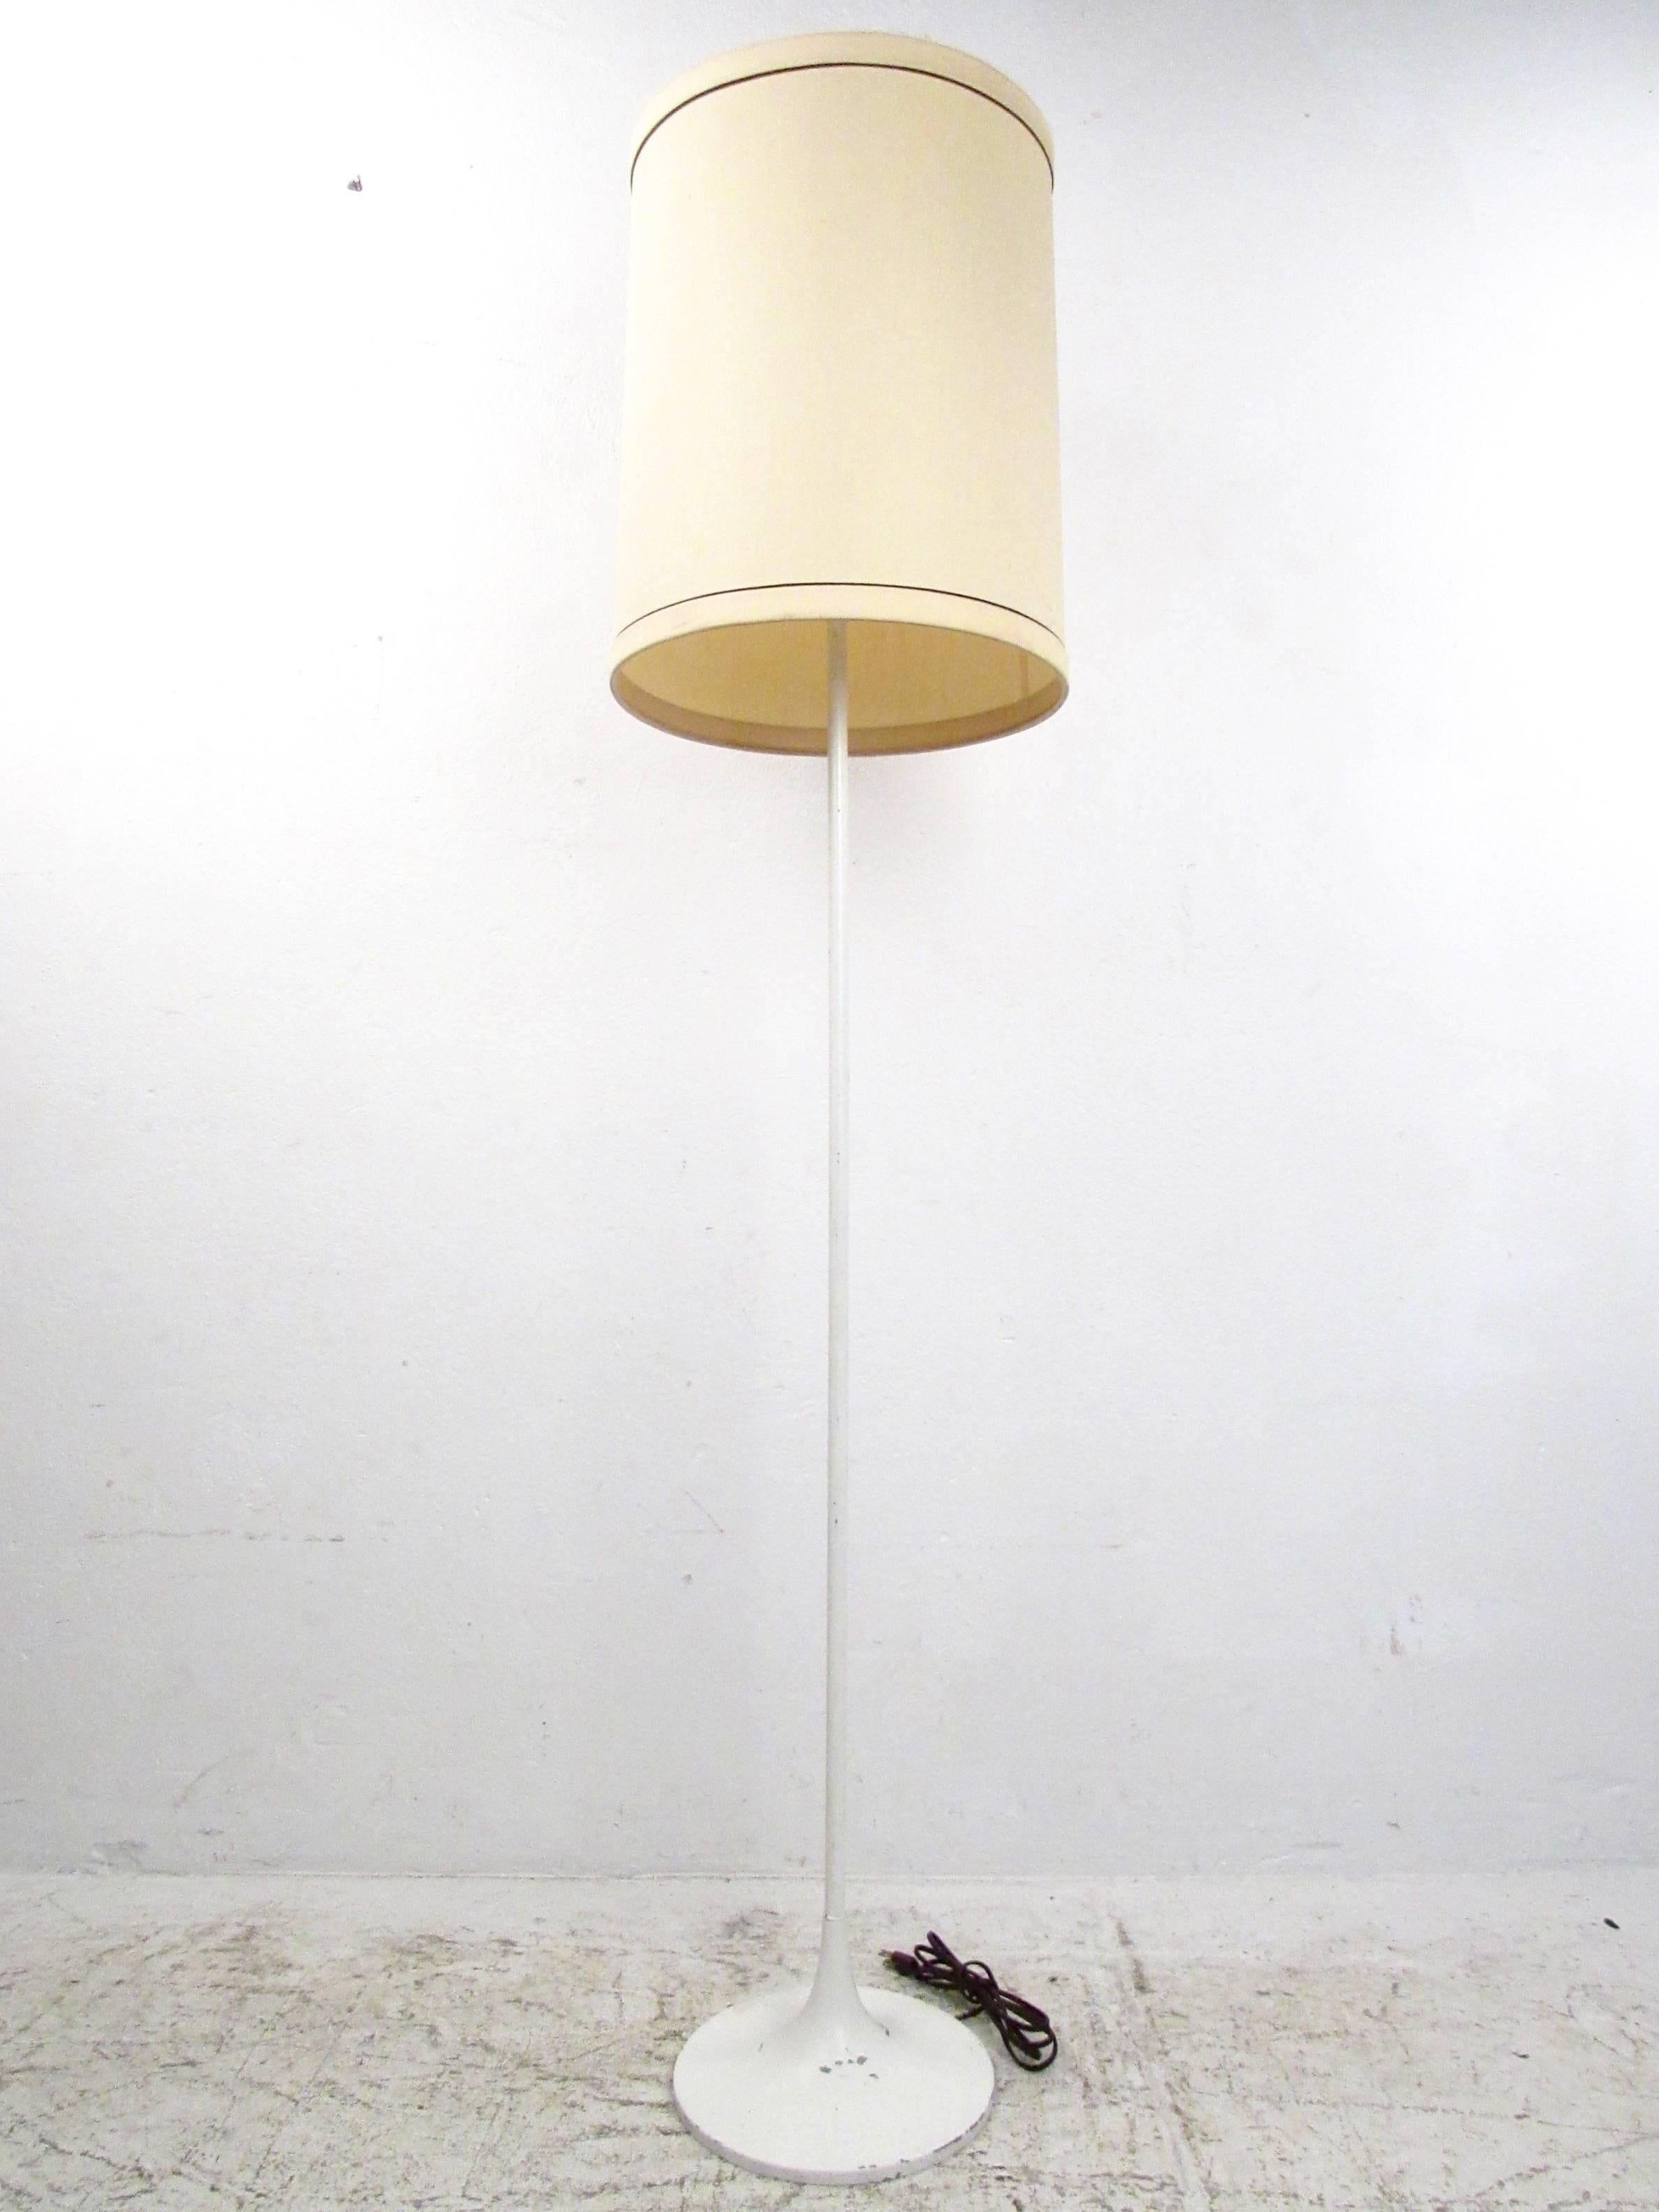 This vintage modern tulip lamp features the unique pedestal style base made popular by  Knoll. Slender sculpted design makes this unique floor lamp a stunning modern addition to any setting. Please confirm item location (NY or NJ).